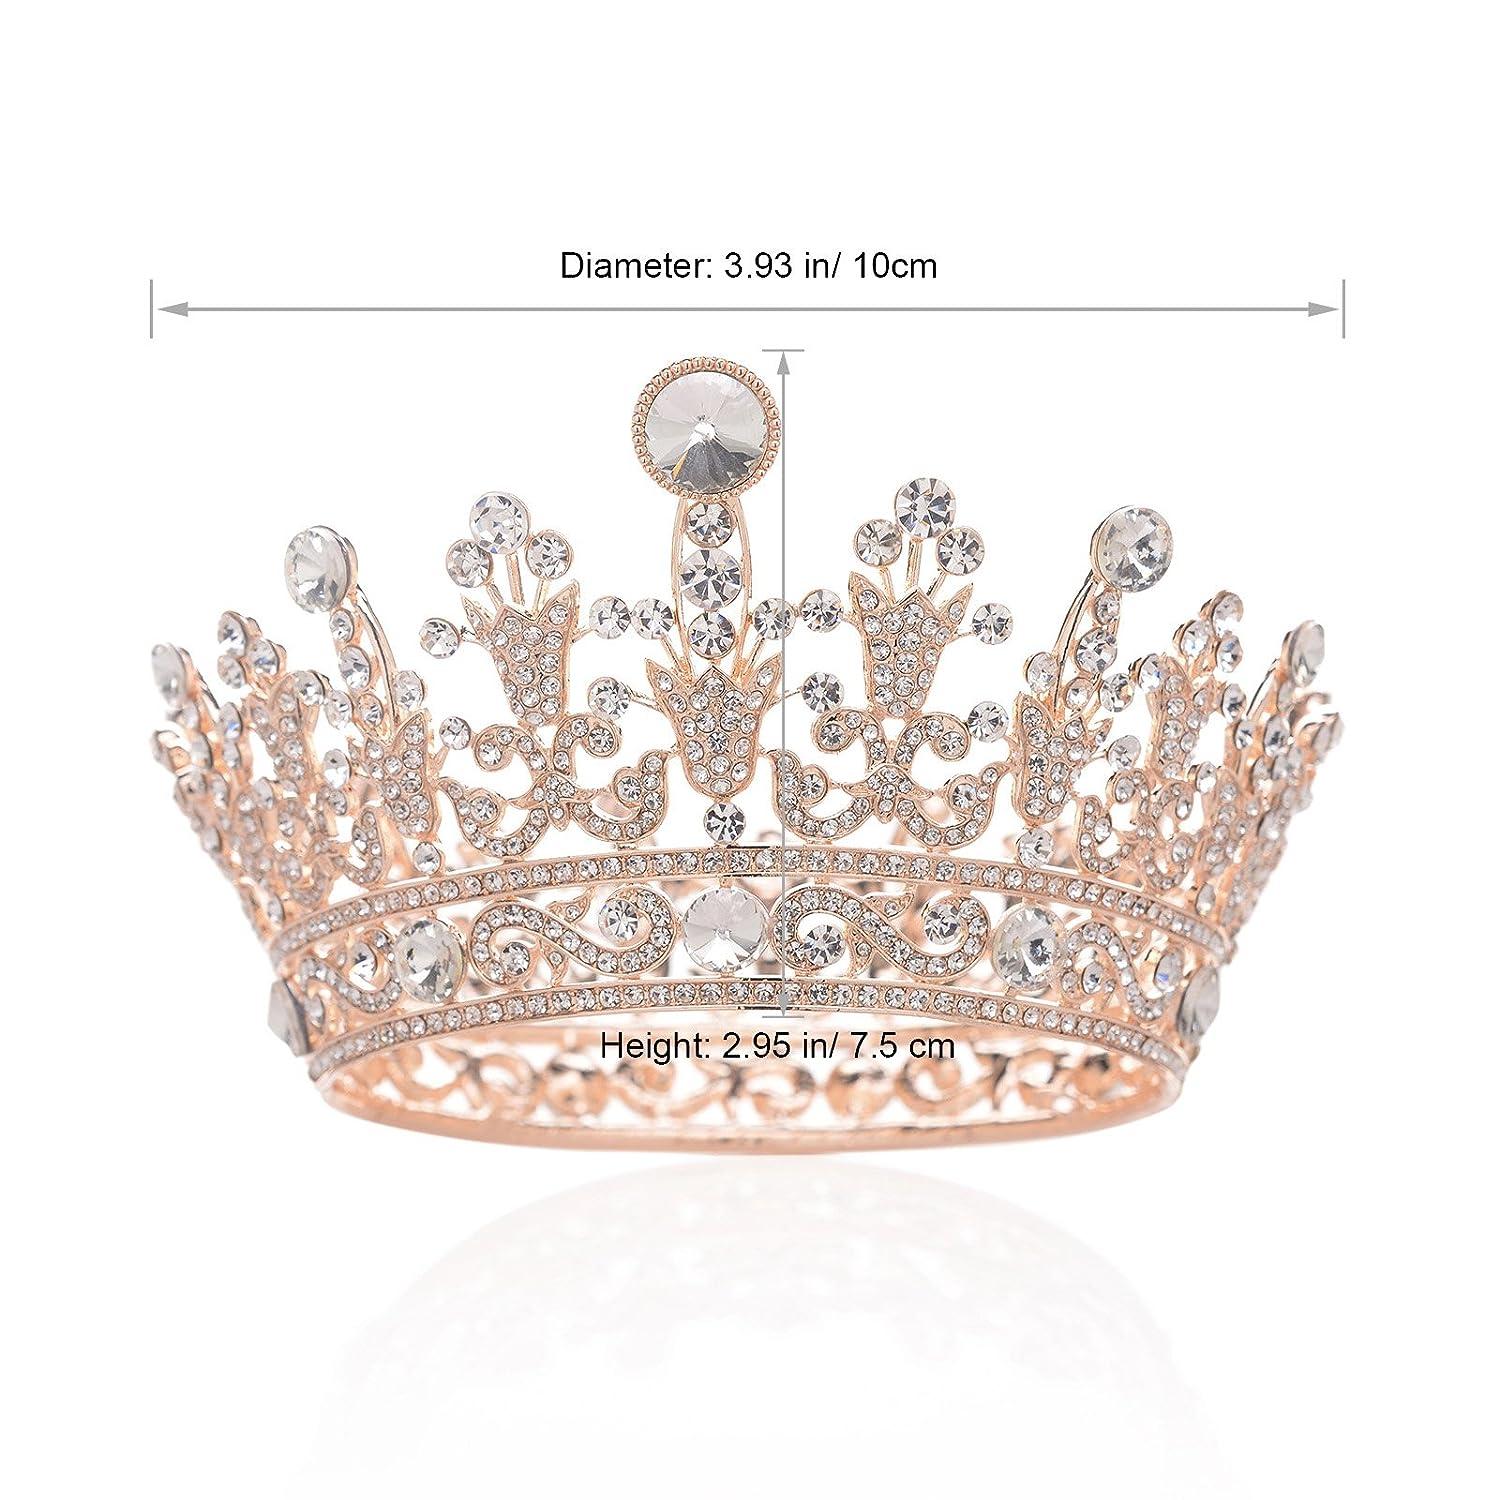 Tian Sweet 34044-GD 8.6 oz Large Queen Crown Cake Topper - Gold, 1 -  Smith's Food and Drug